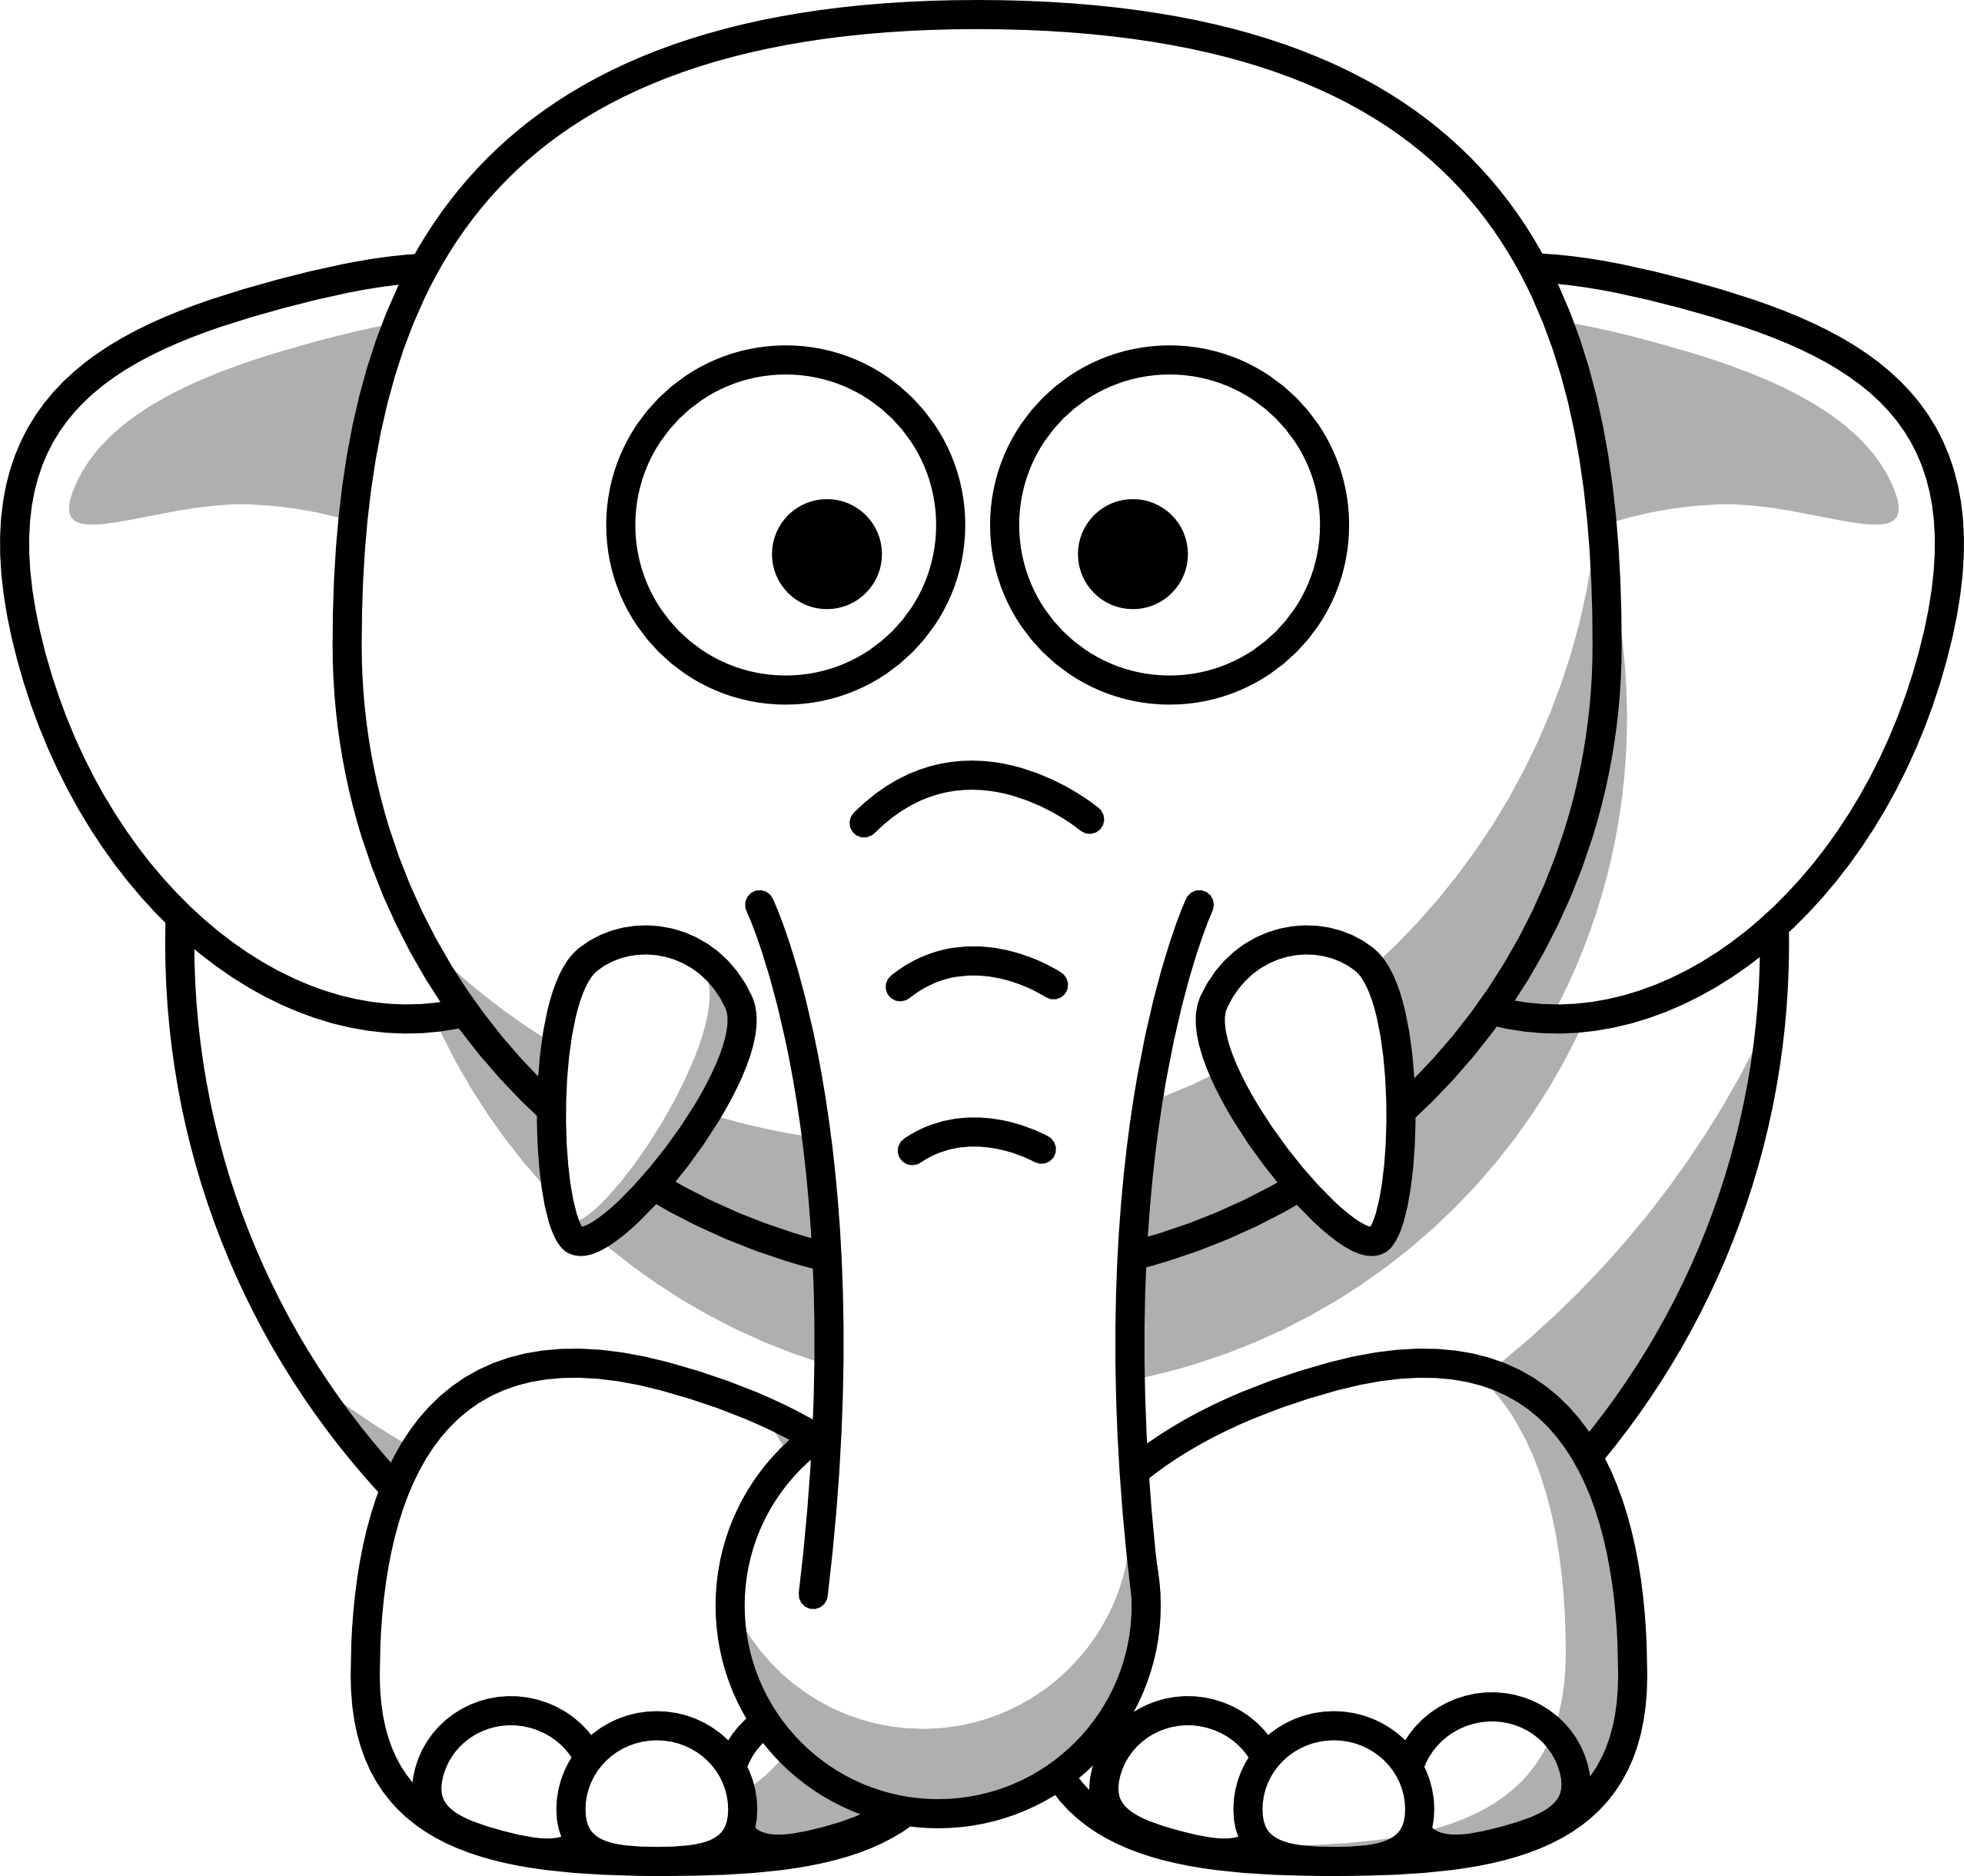 Coral clipart elephant. Black and white animal